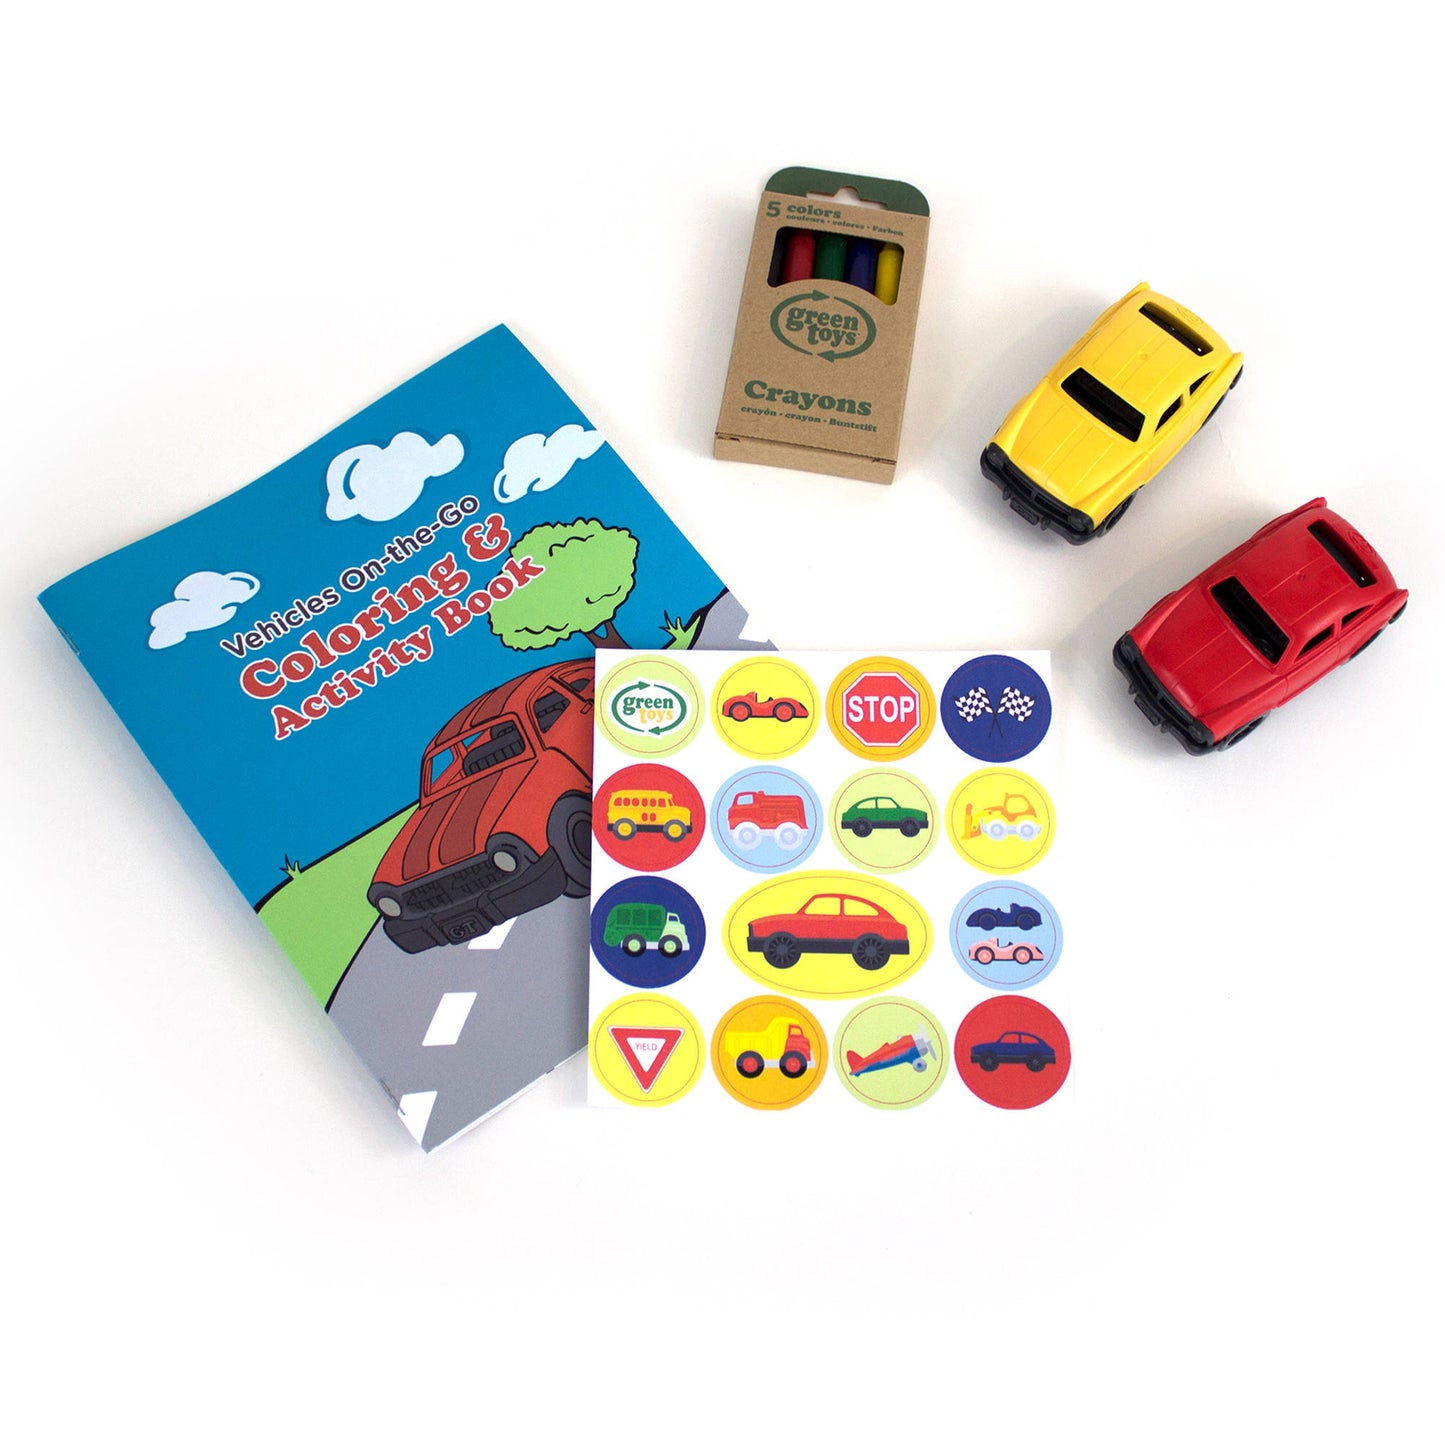 Green Toys Vehicles Coloring & Activity Kit